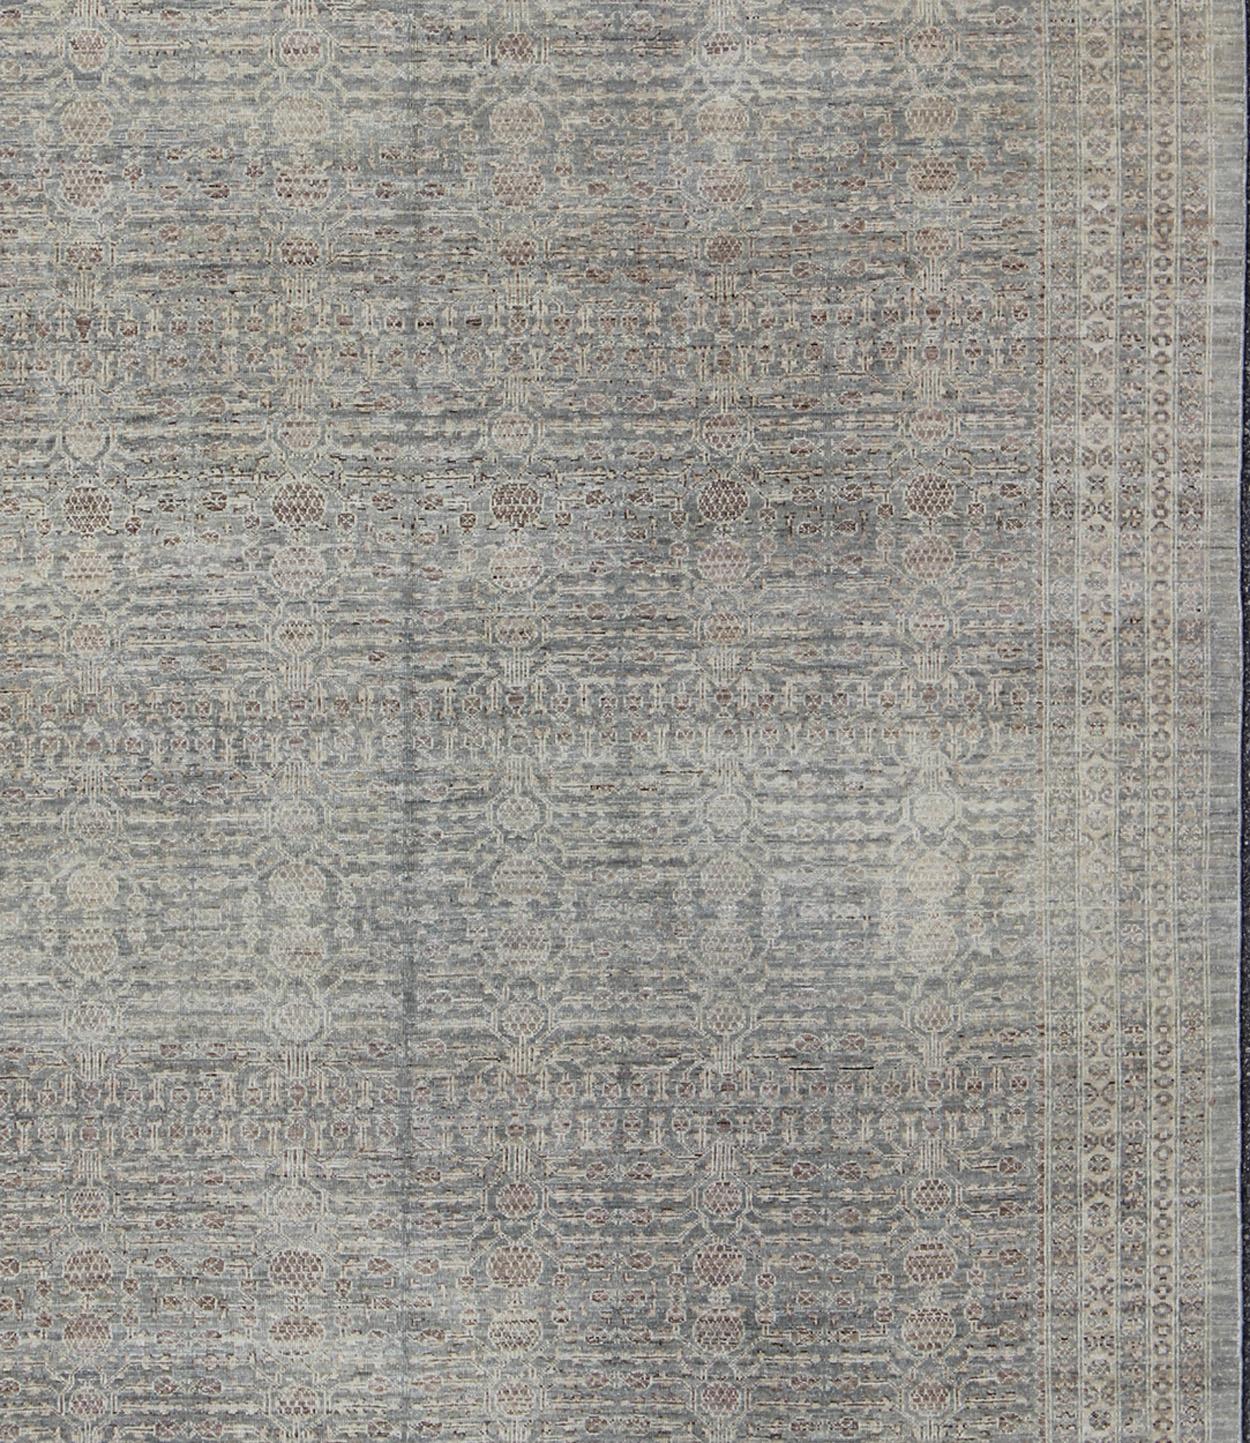 Light gray/green background Khotan rug in Pomegranate Design with light and medium Brown highlights and taupe, rug KOL-69236 country of origin / type: Afghanistan / Khotan

This transitional Khotan features all-over pomegranate design flanked by a